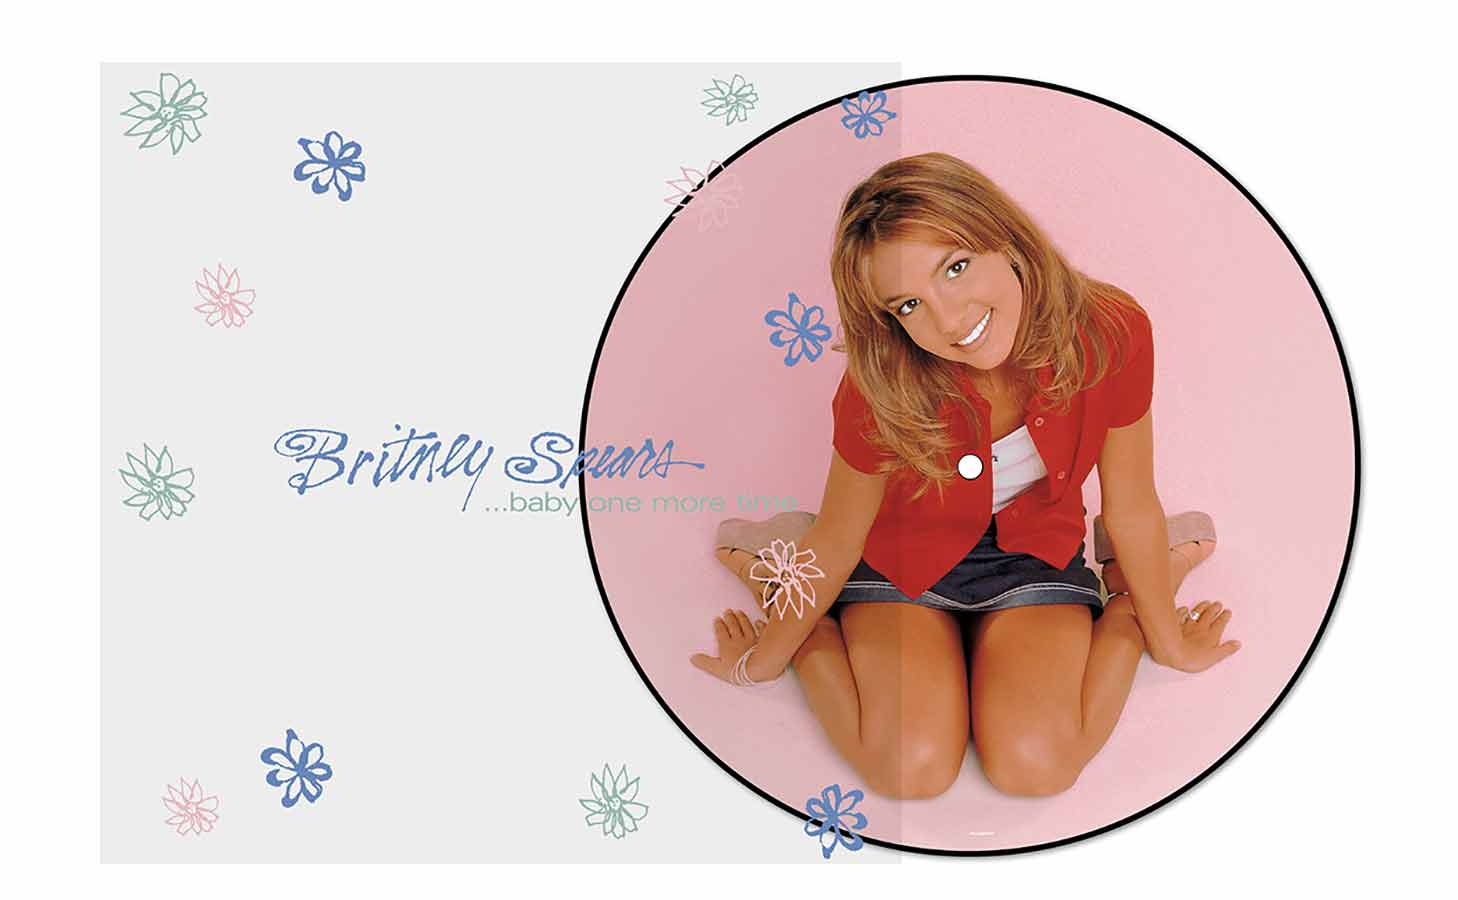 Global Pop Icon, Britney Spears’ Debut Single, “…Baby One More Time” Celebrates 20th Anniversary